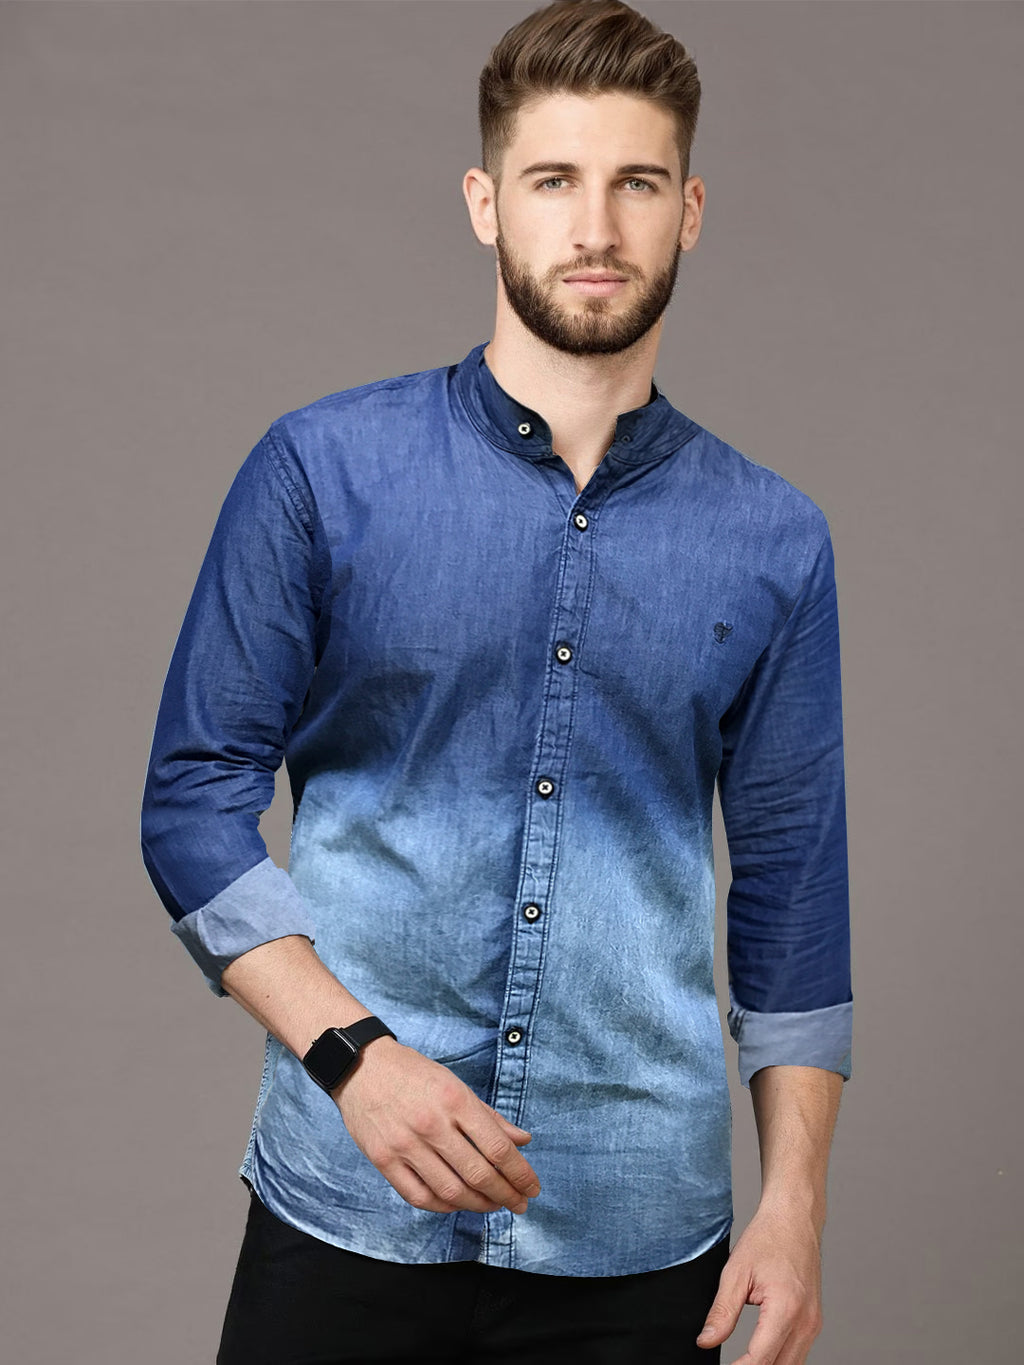 2023 New Men's Shirt Business Casual Single Breasted Fashion Solid Color Men  Denim Shirts Autumn Slim Lapel Male Blue Jean Tops - Shirts - AliExpress